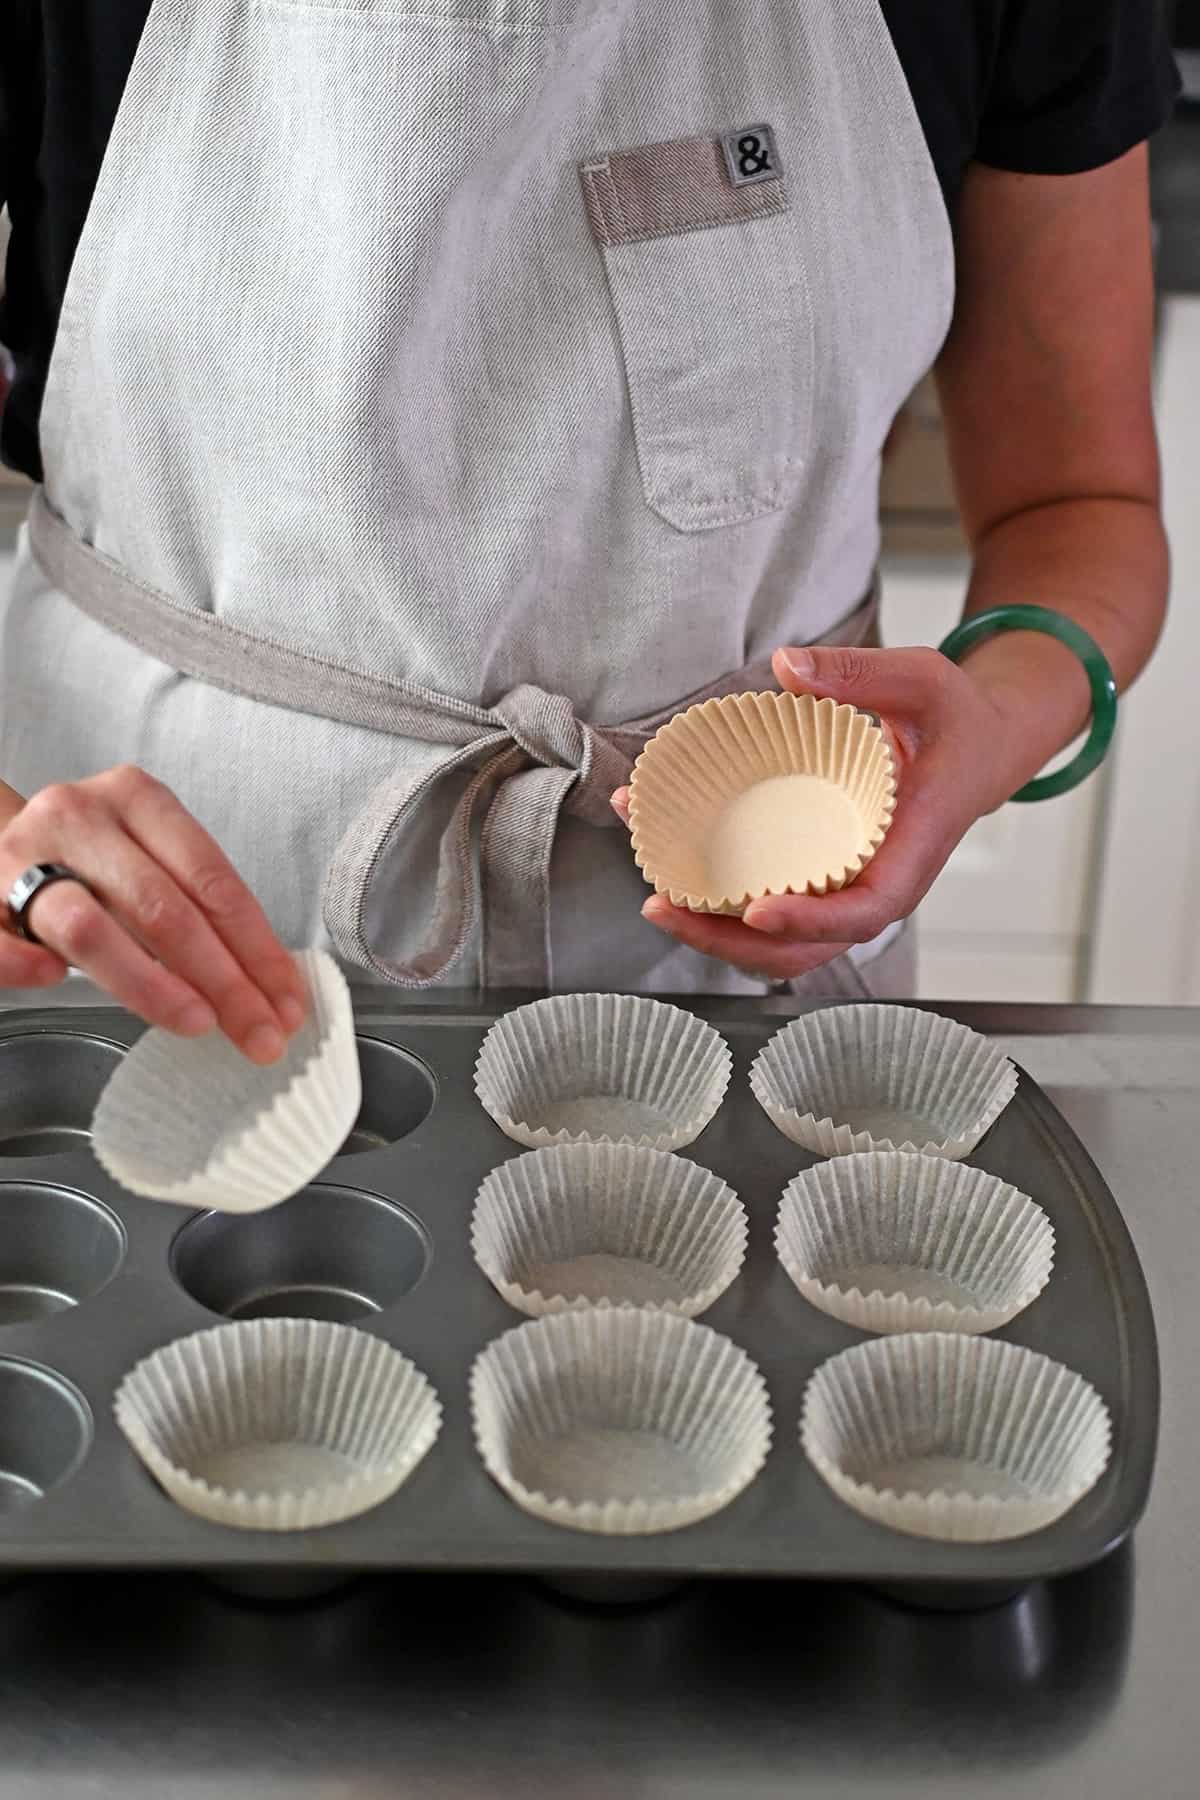 A person in a beige apron is placing parchment liners into a muffin tin.